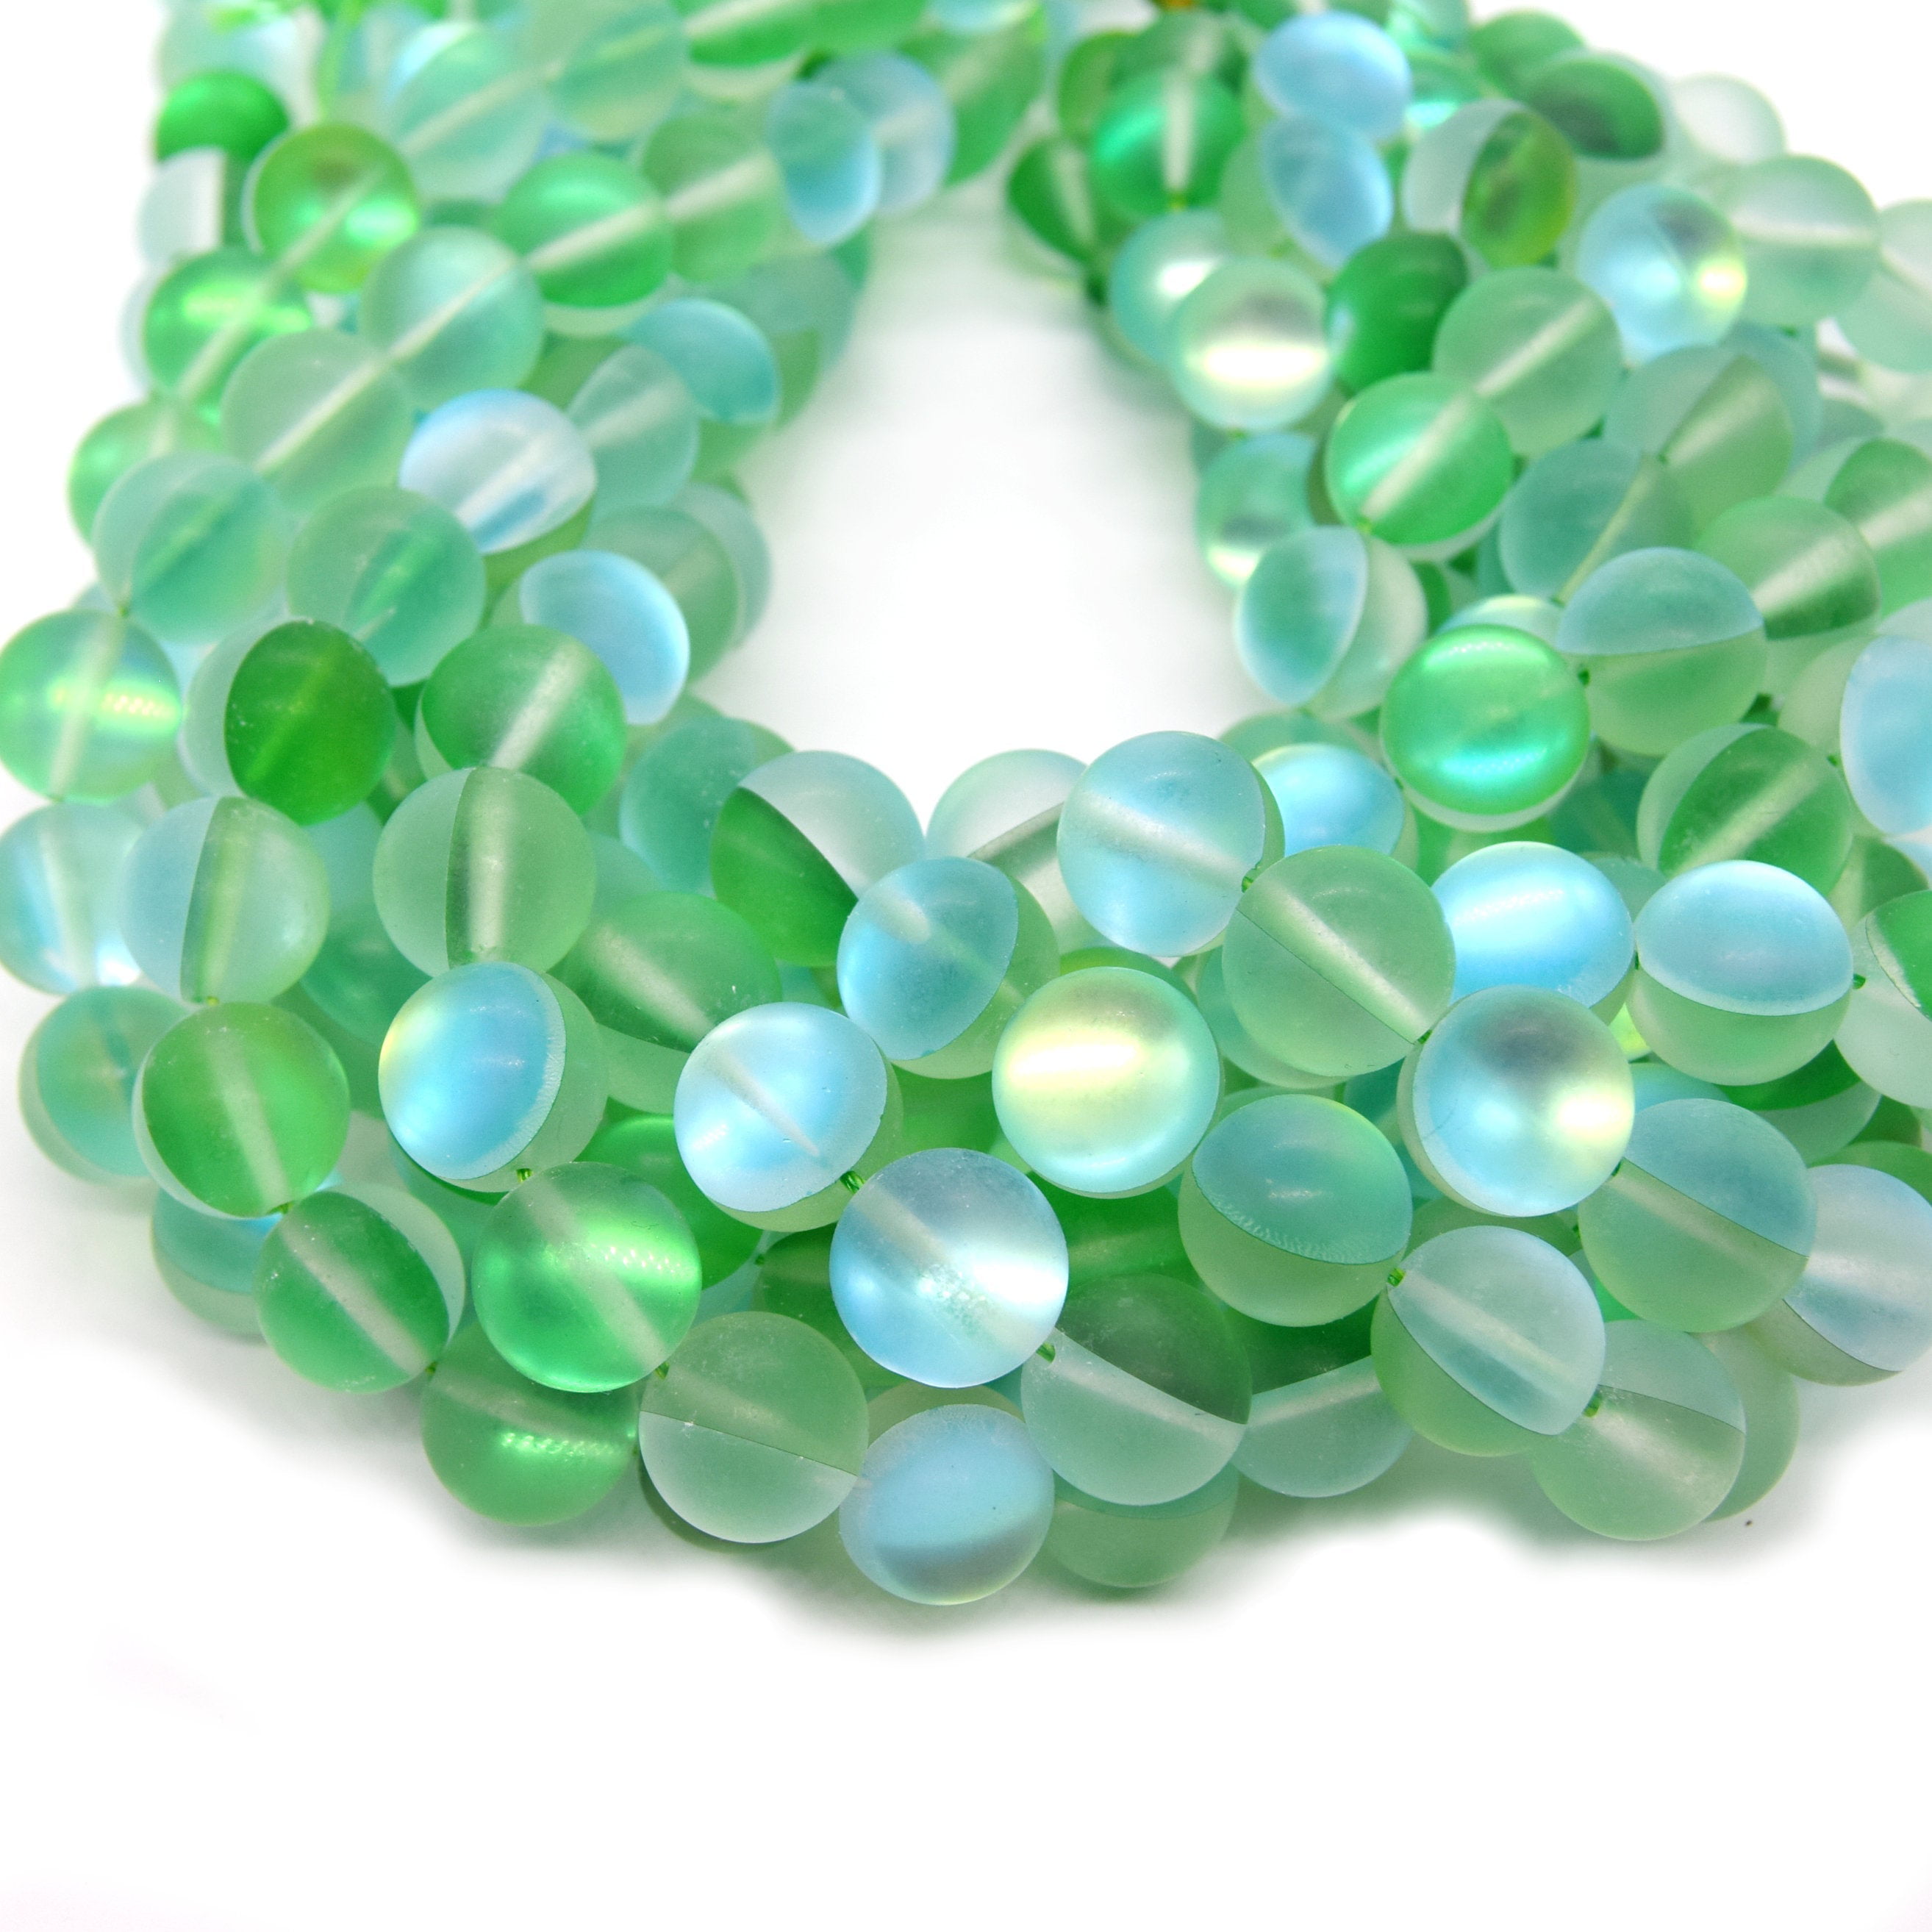 20 pcs 16mm Sea Green quartz crystal round faceted glass beads 